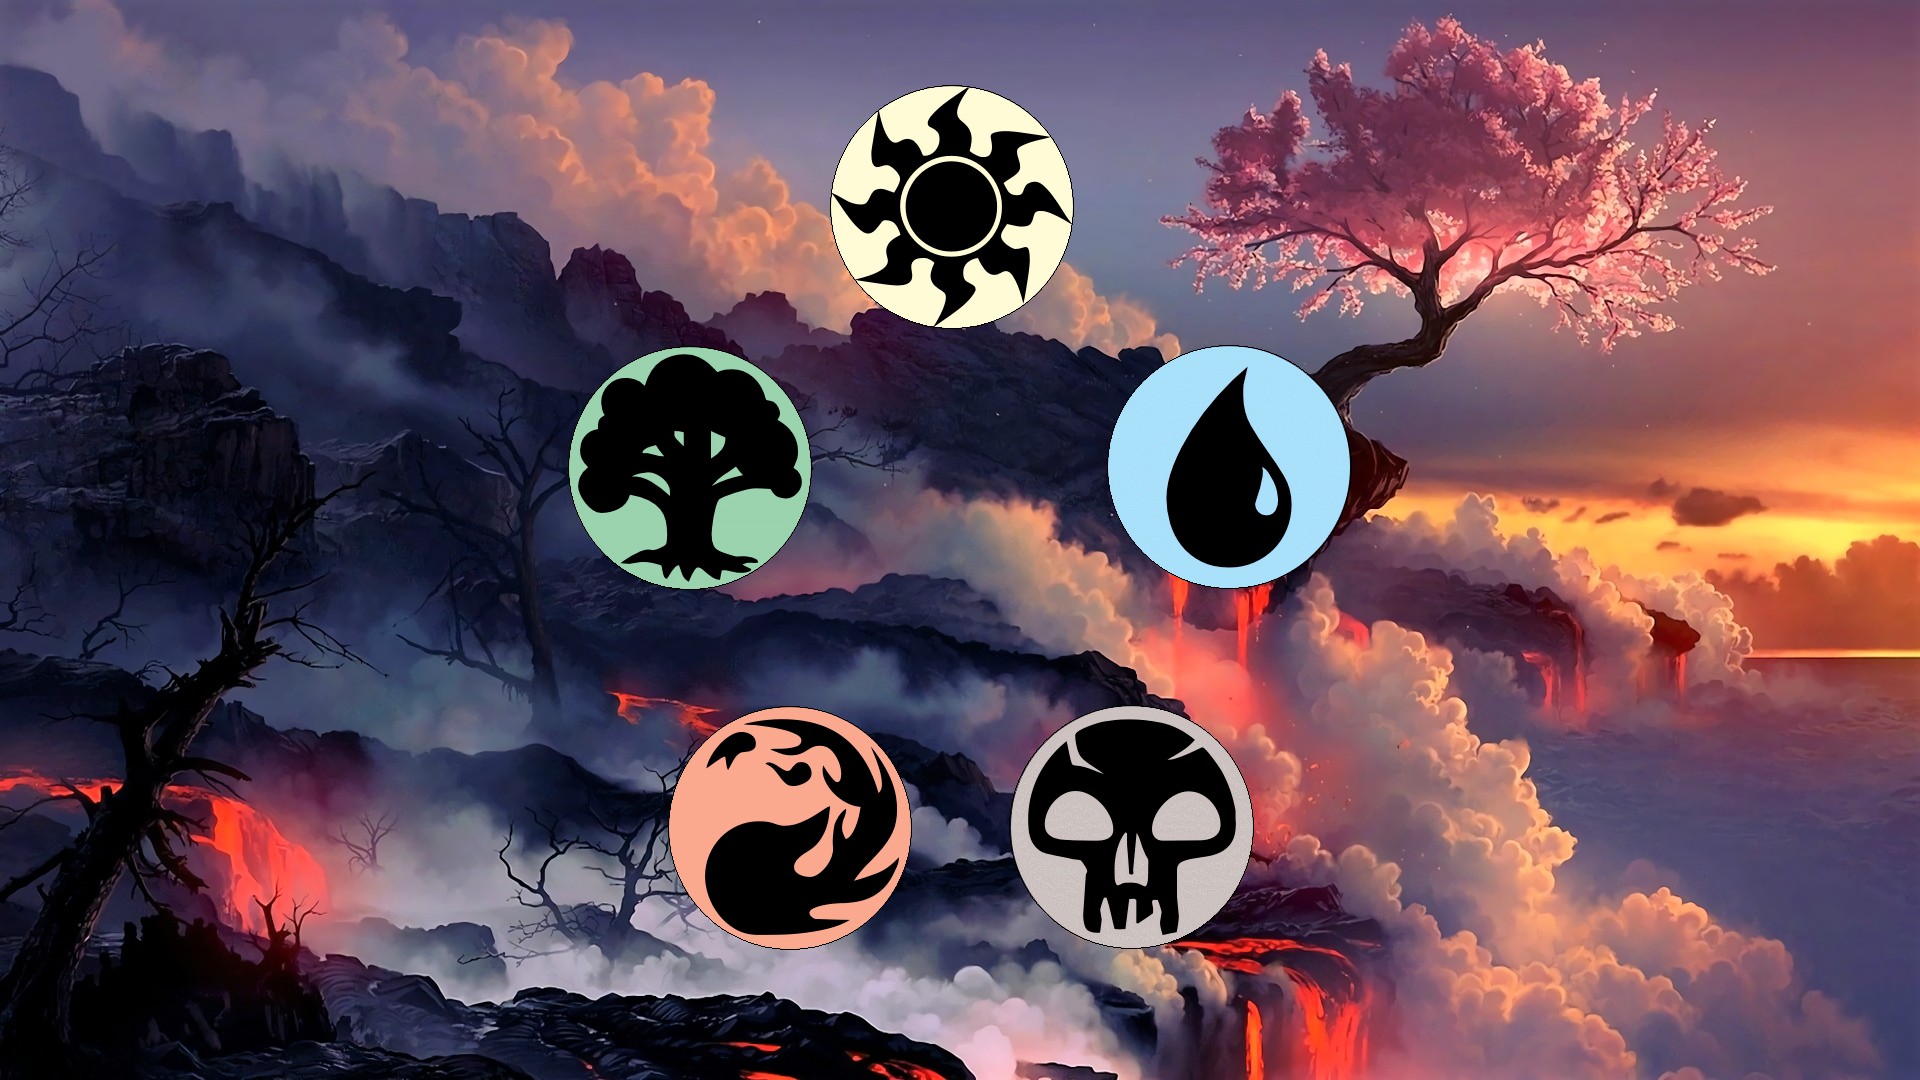 Magic: The Gathering, Trading Card Games, Elements, Lava, Smoke, Cherry blossom Wallpaper